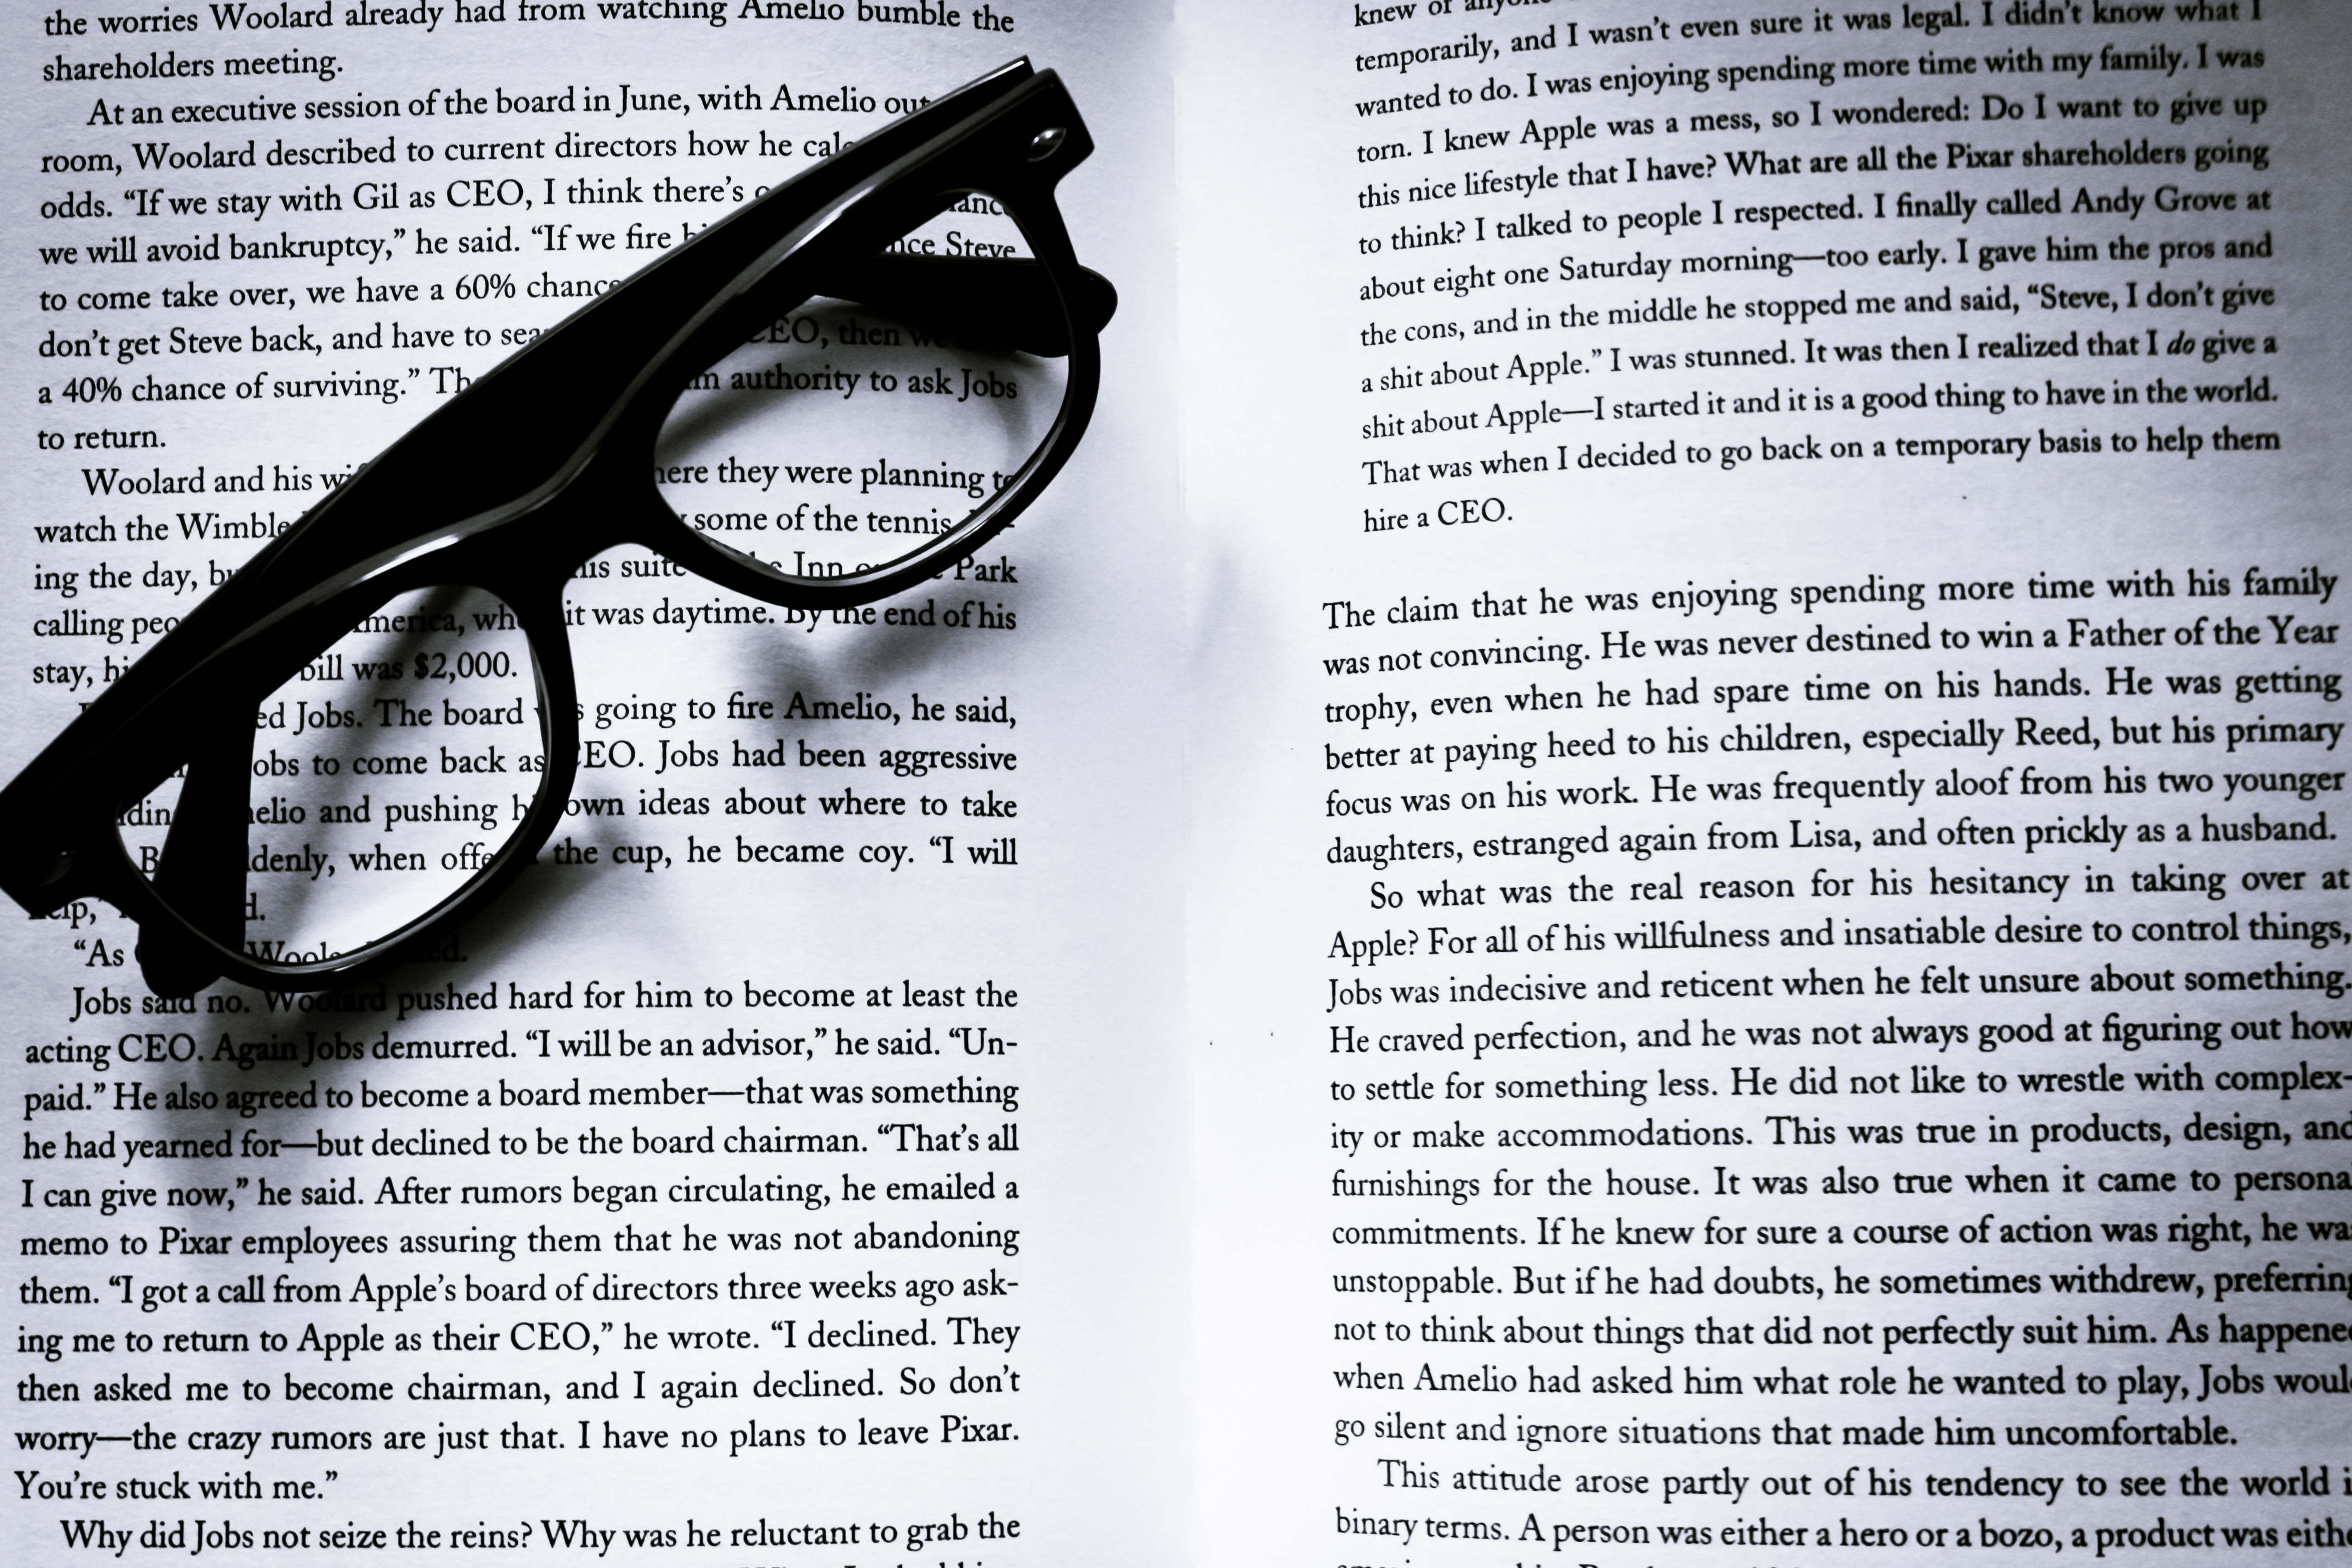 letters, miscellanea, miscellaneous, bw, chb, book, glasses, spectacles